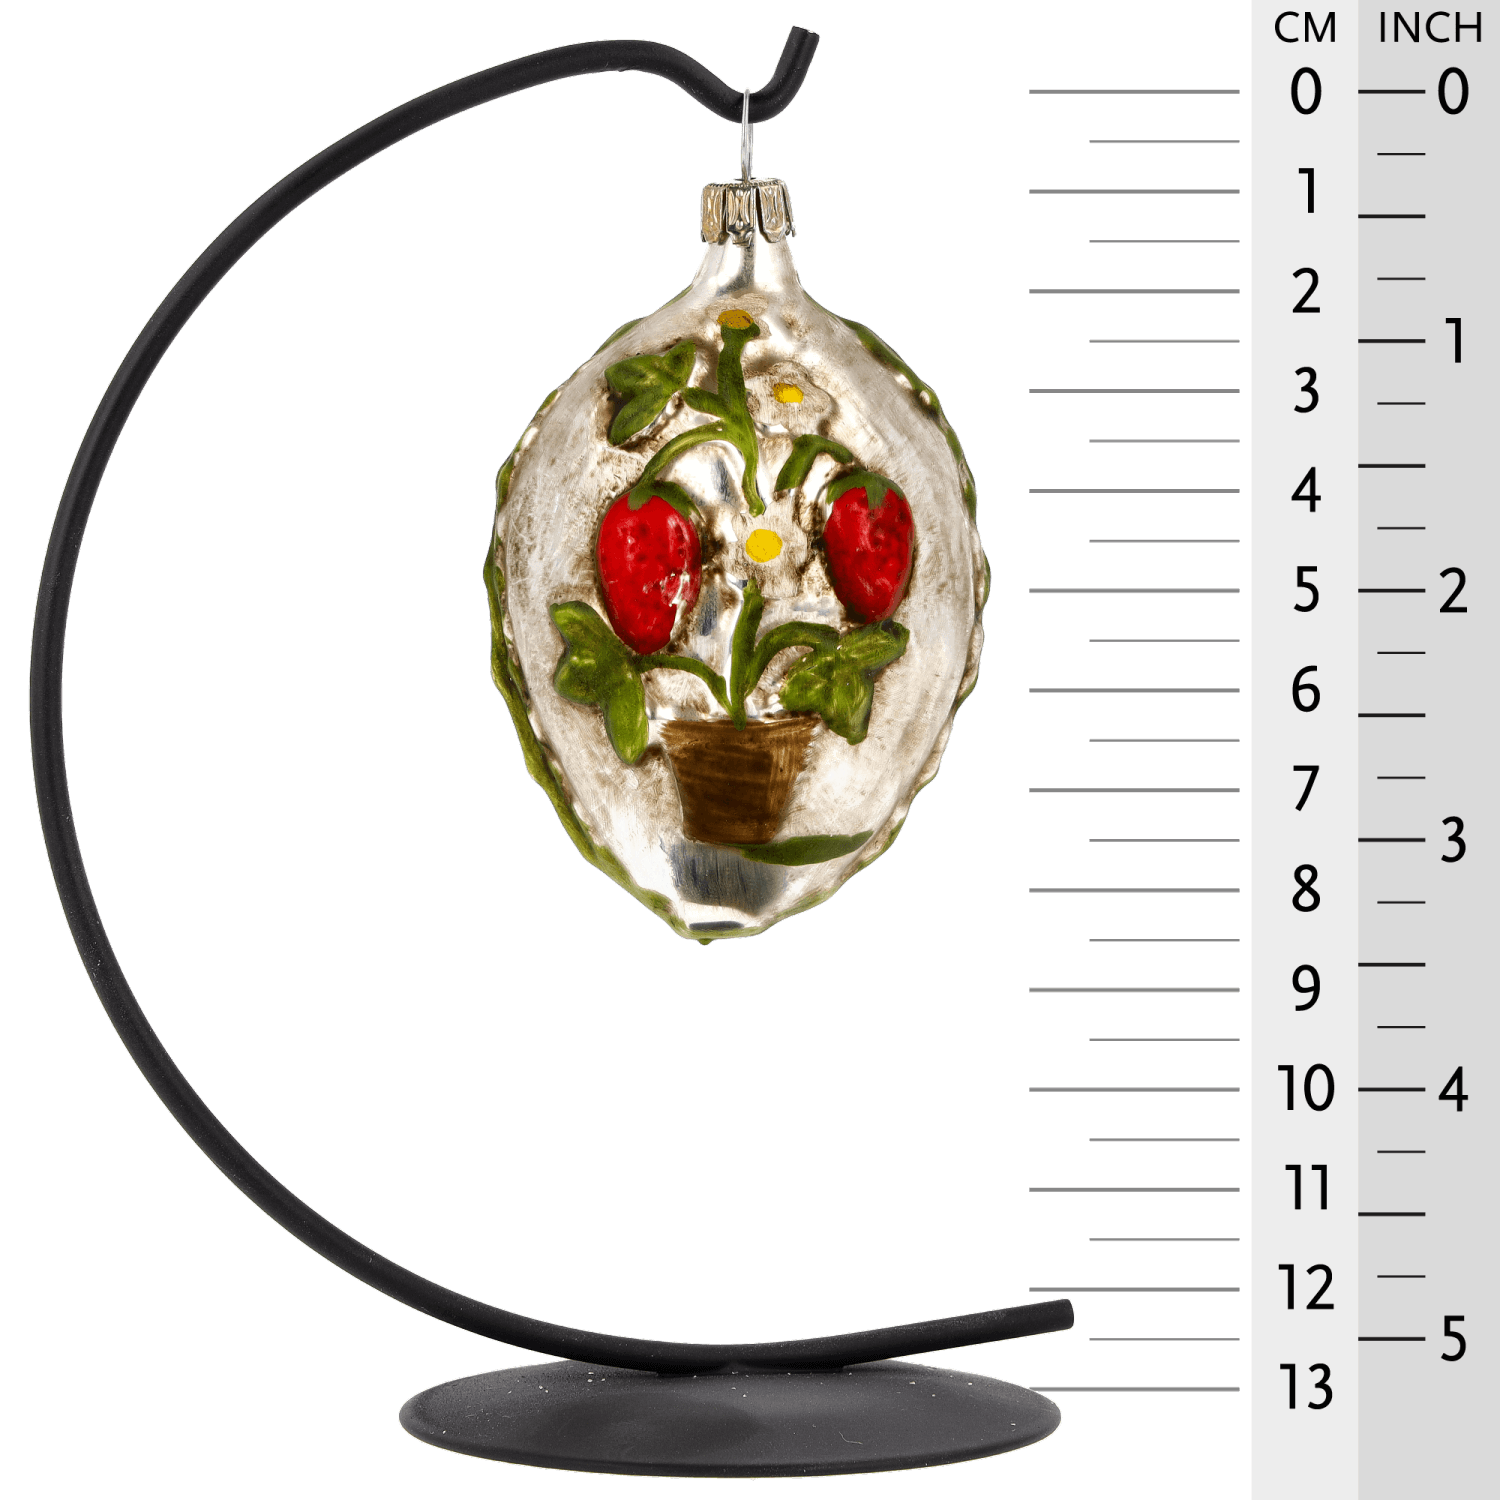 MAROLIN® - Glass ornament "Egg with flowerpot and strawberries"